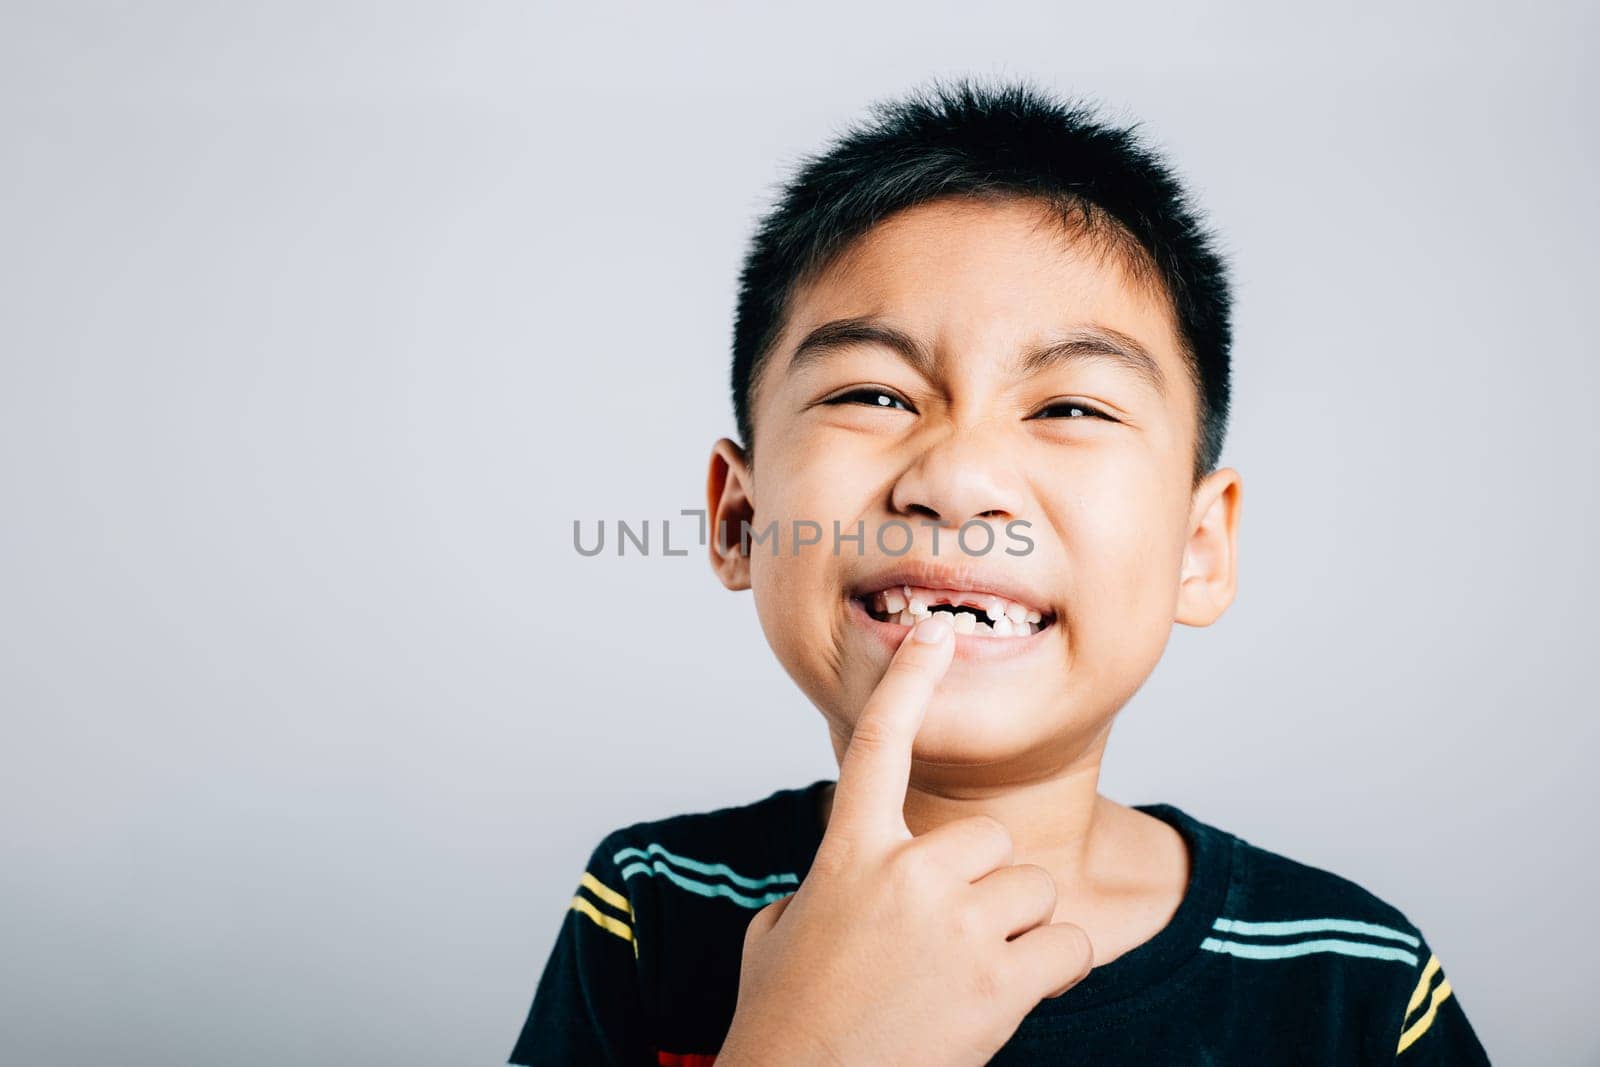 Little boy wide smile reveals gap of growing molar. At six years old losing baby teeth marks delightful stage in dental growth and care. joyous portrait. teeth new gap dentist problems by Sorapop